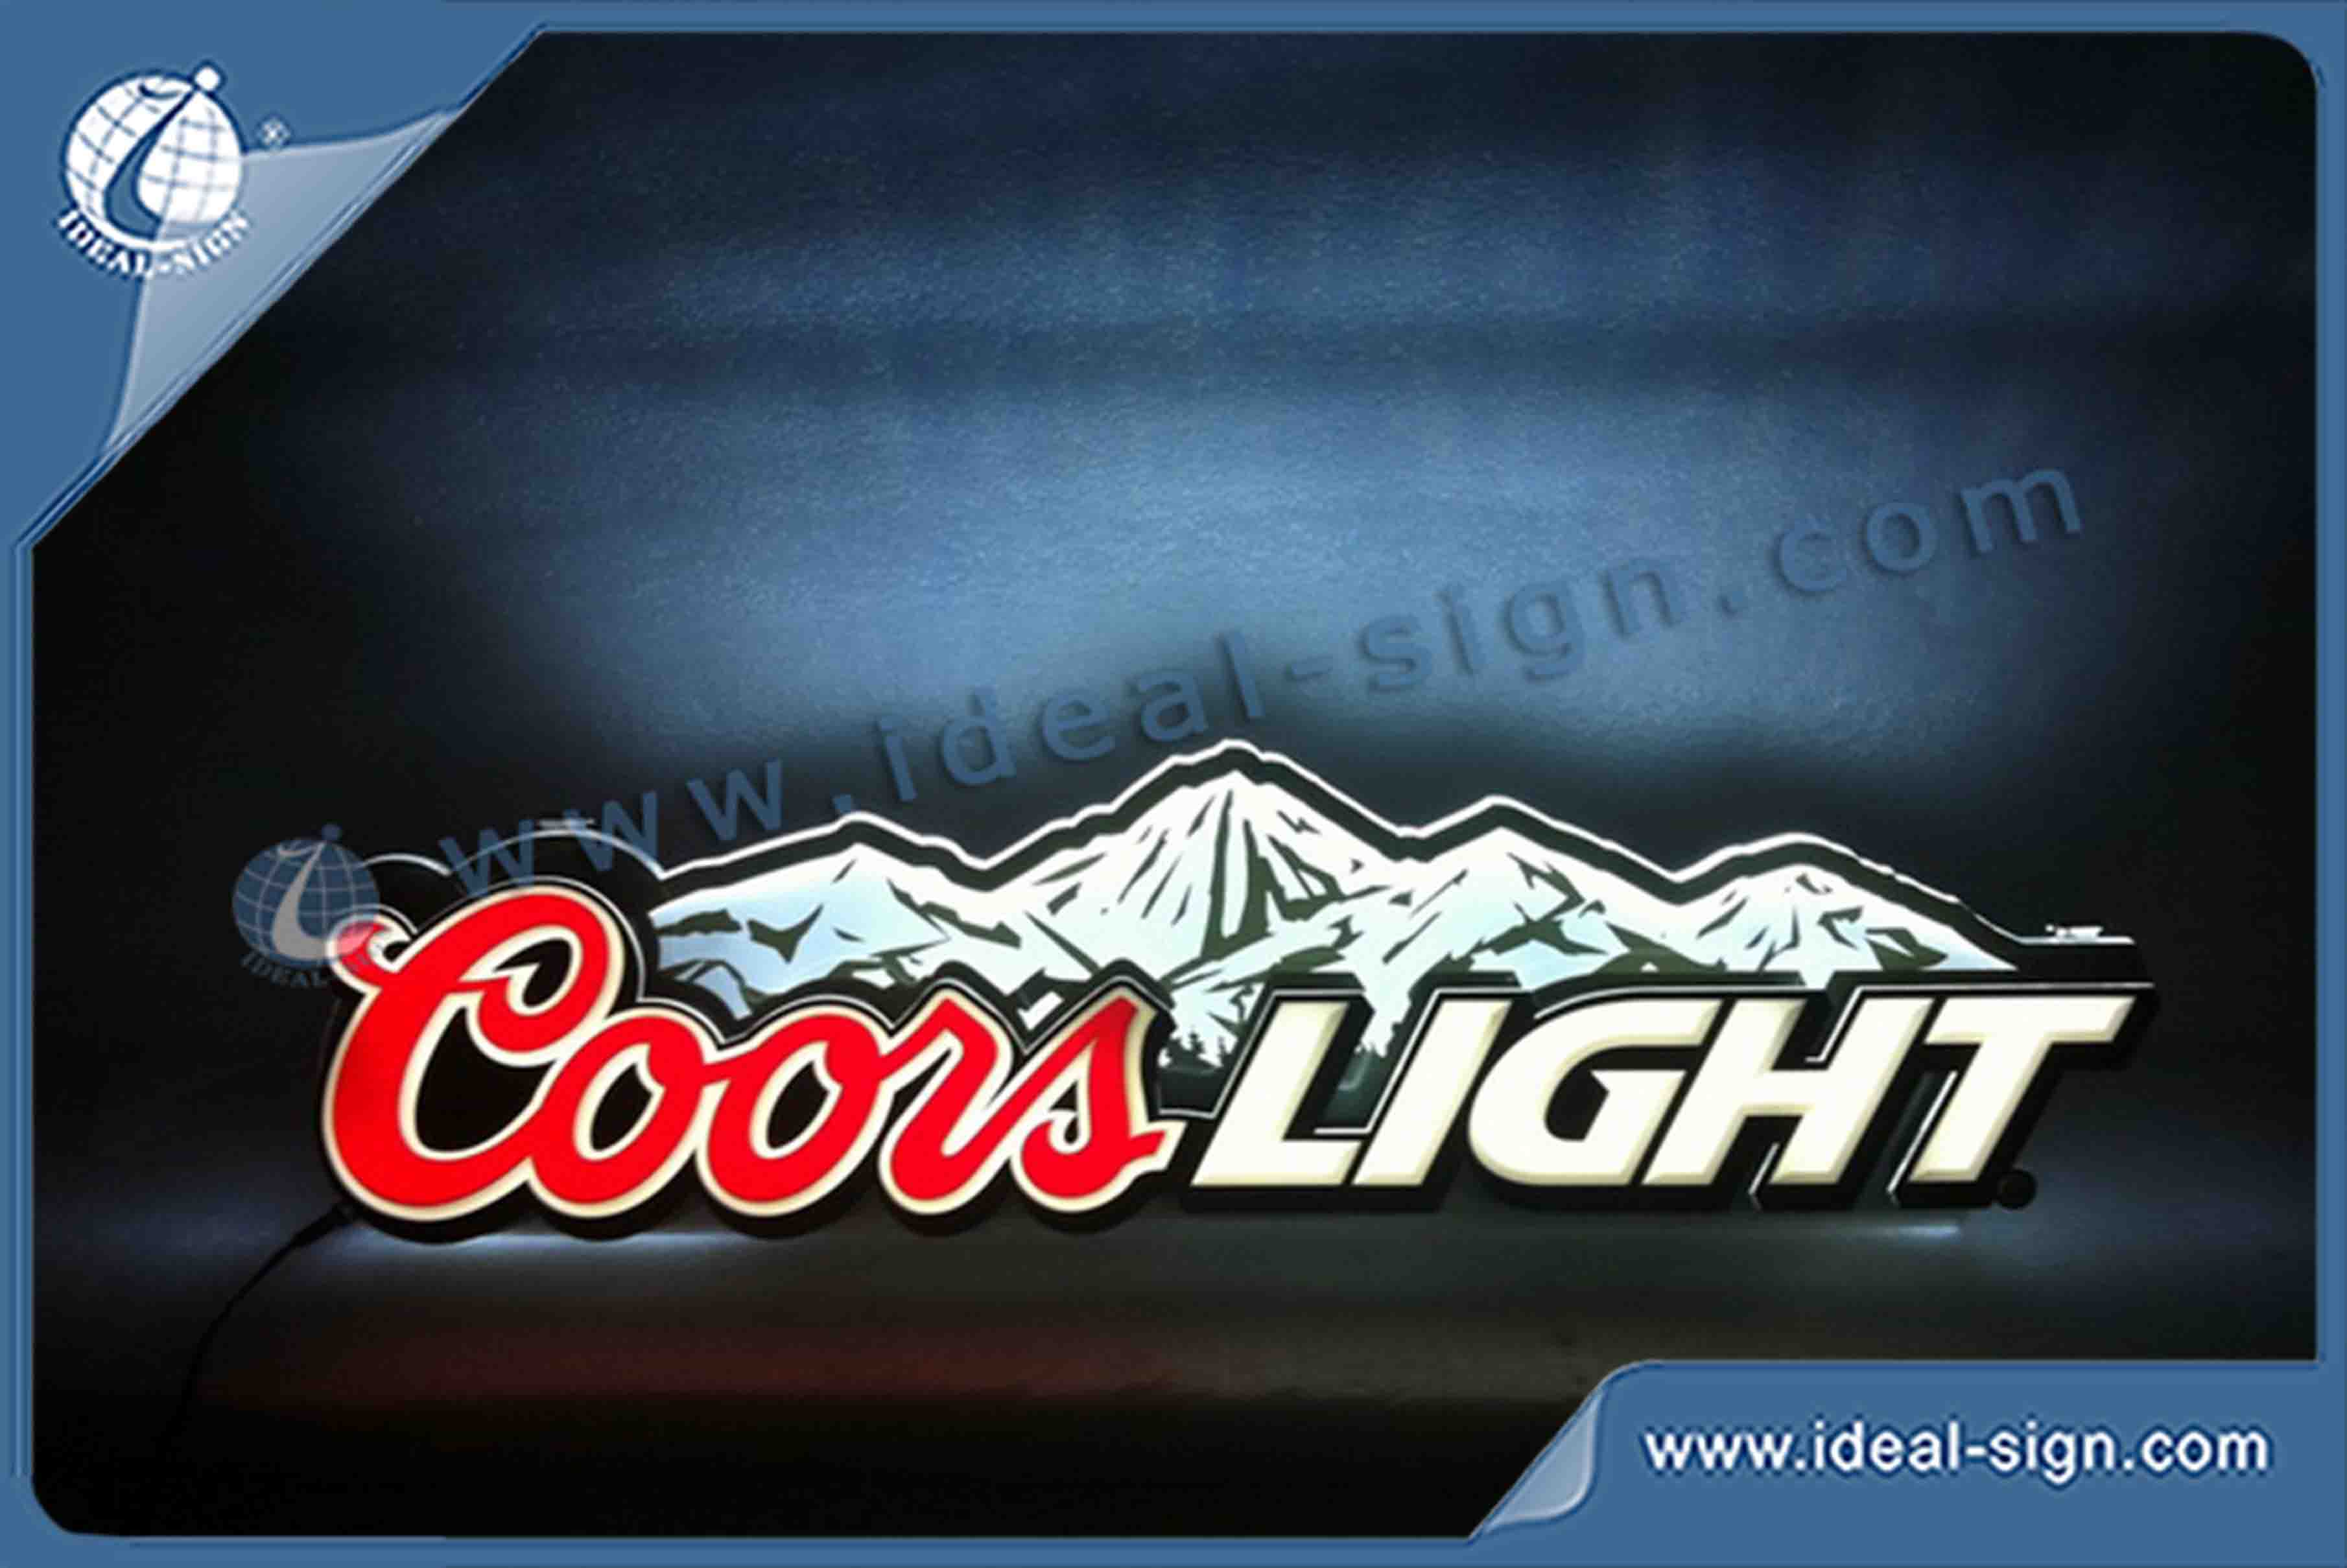 Coors Light Light Up Wall Signs Made Of Acrylic LED For Beer Promotion And Brand Advertising